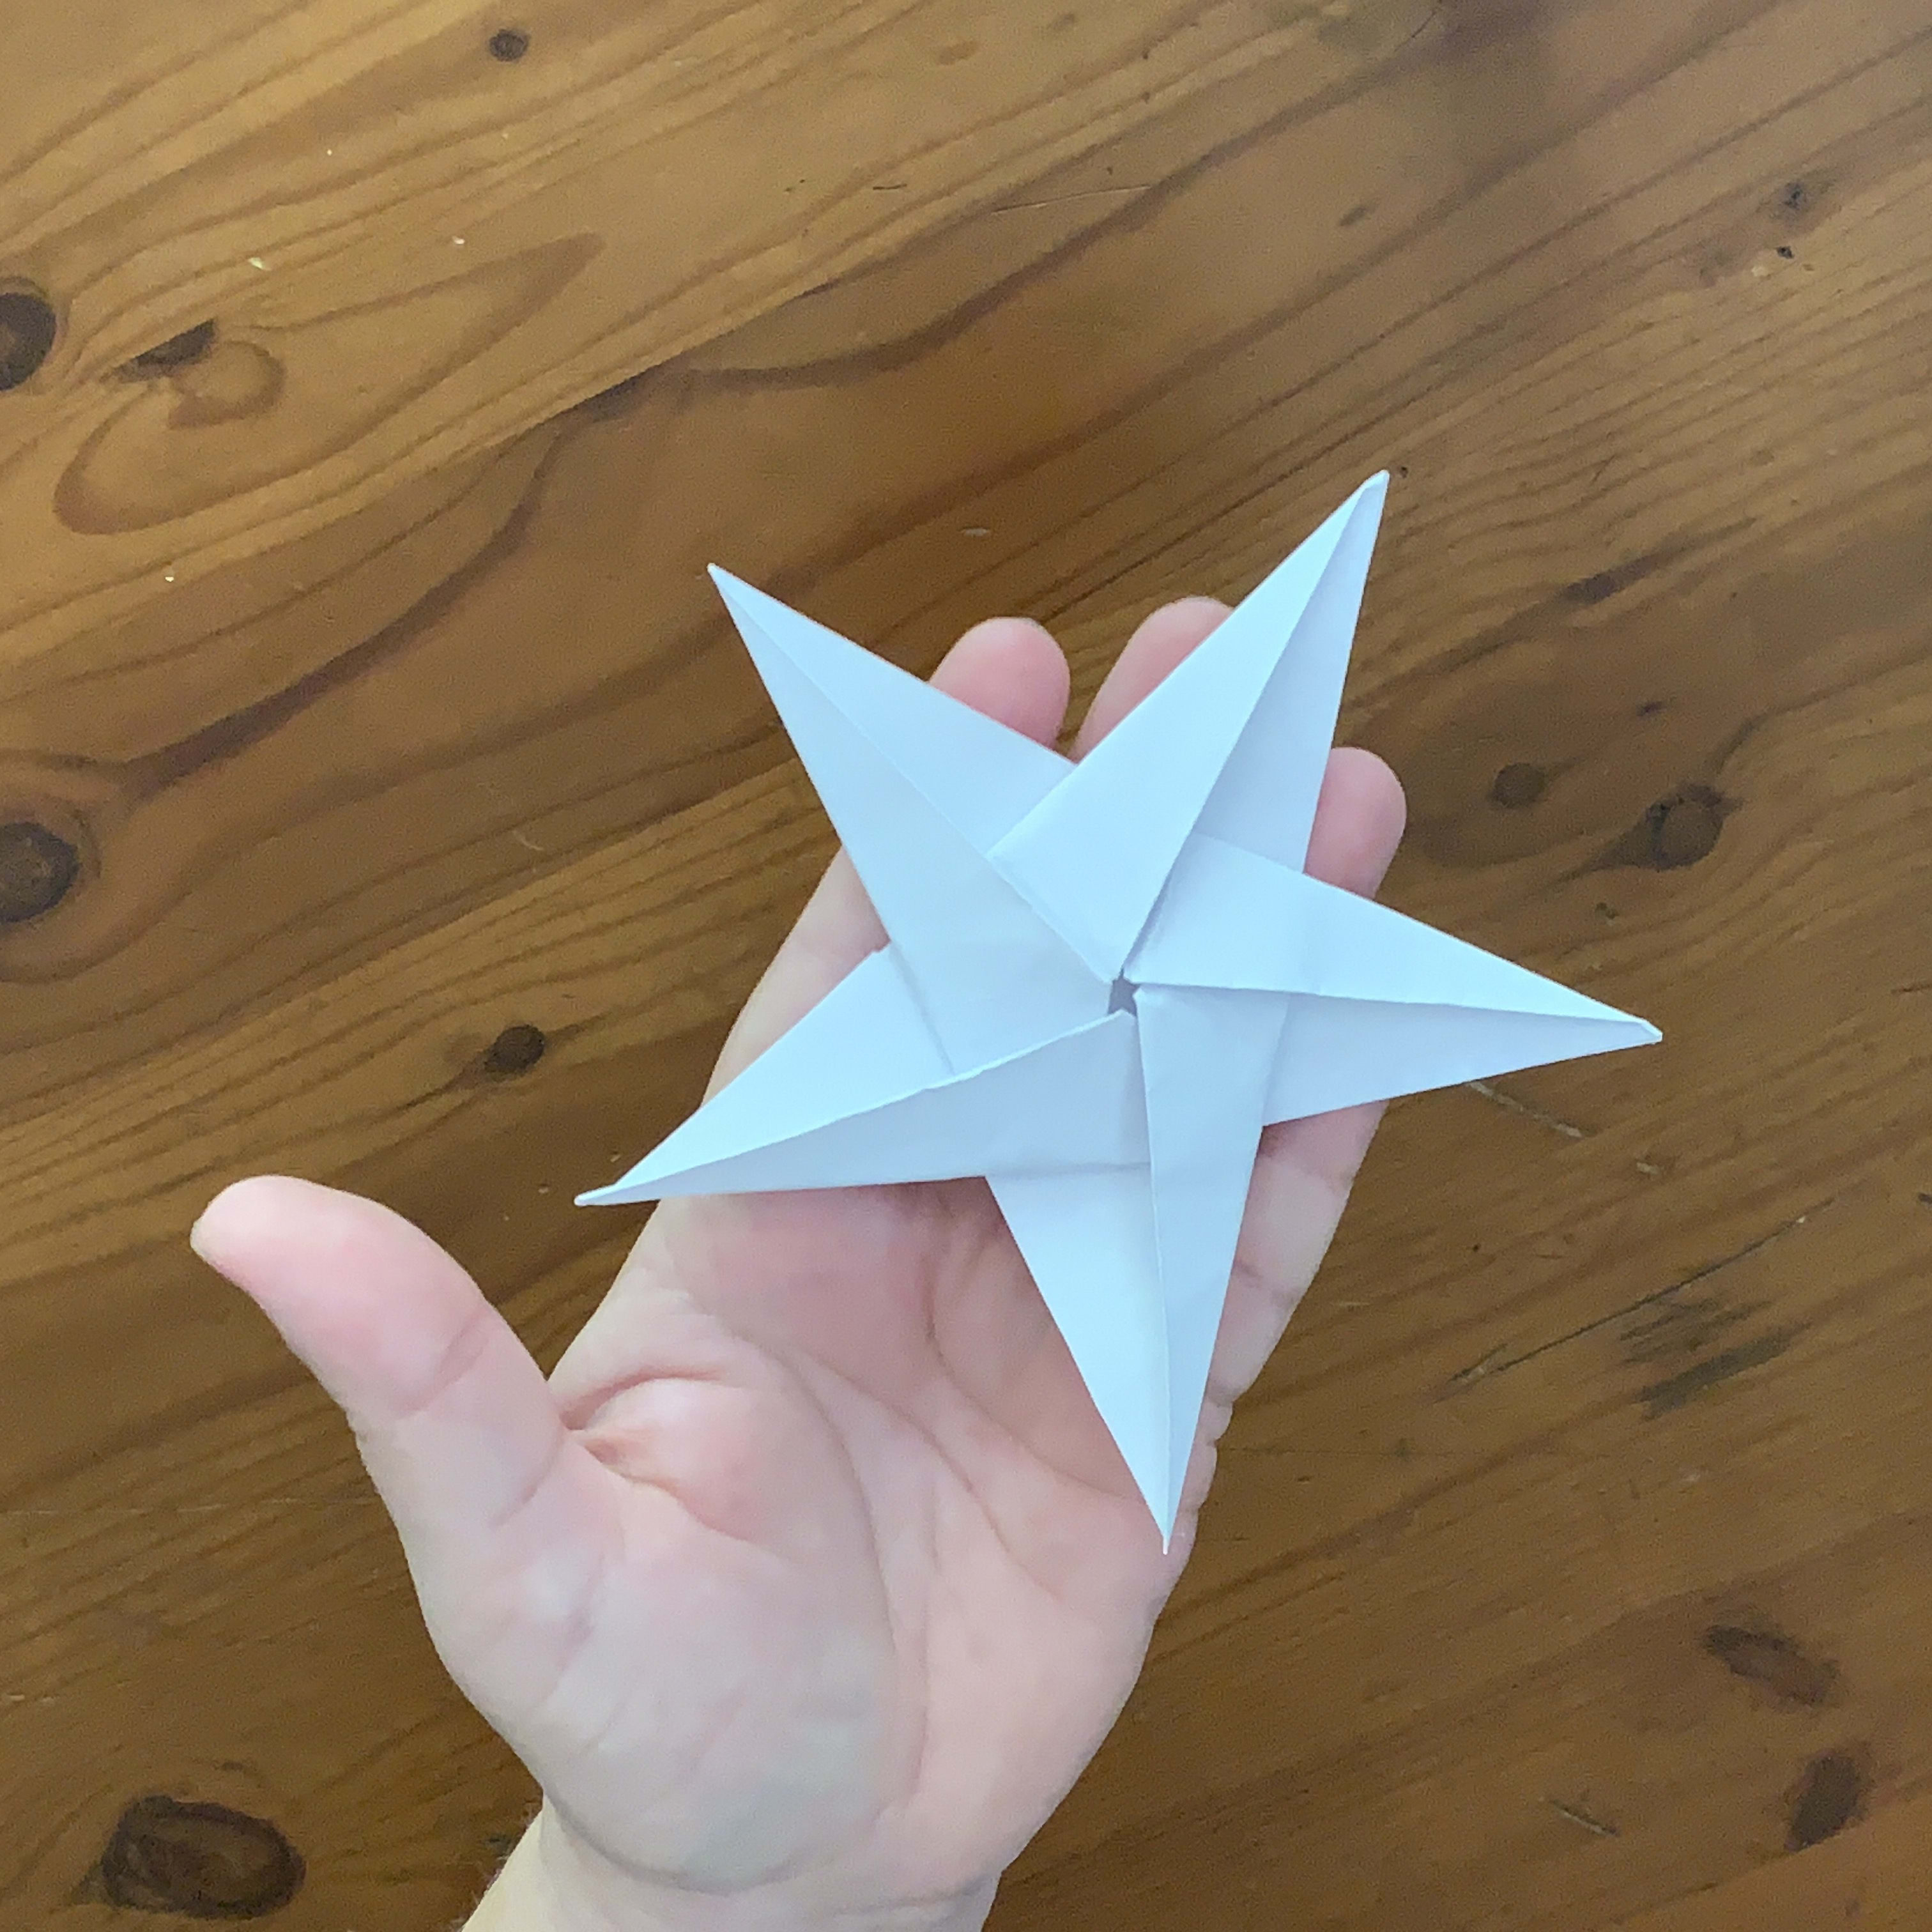 5 POINTED ORIGAMI STAR , HOW TO MAKE - Easy to Follow Tutorial in